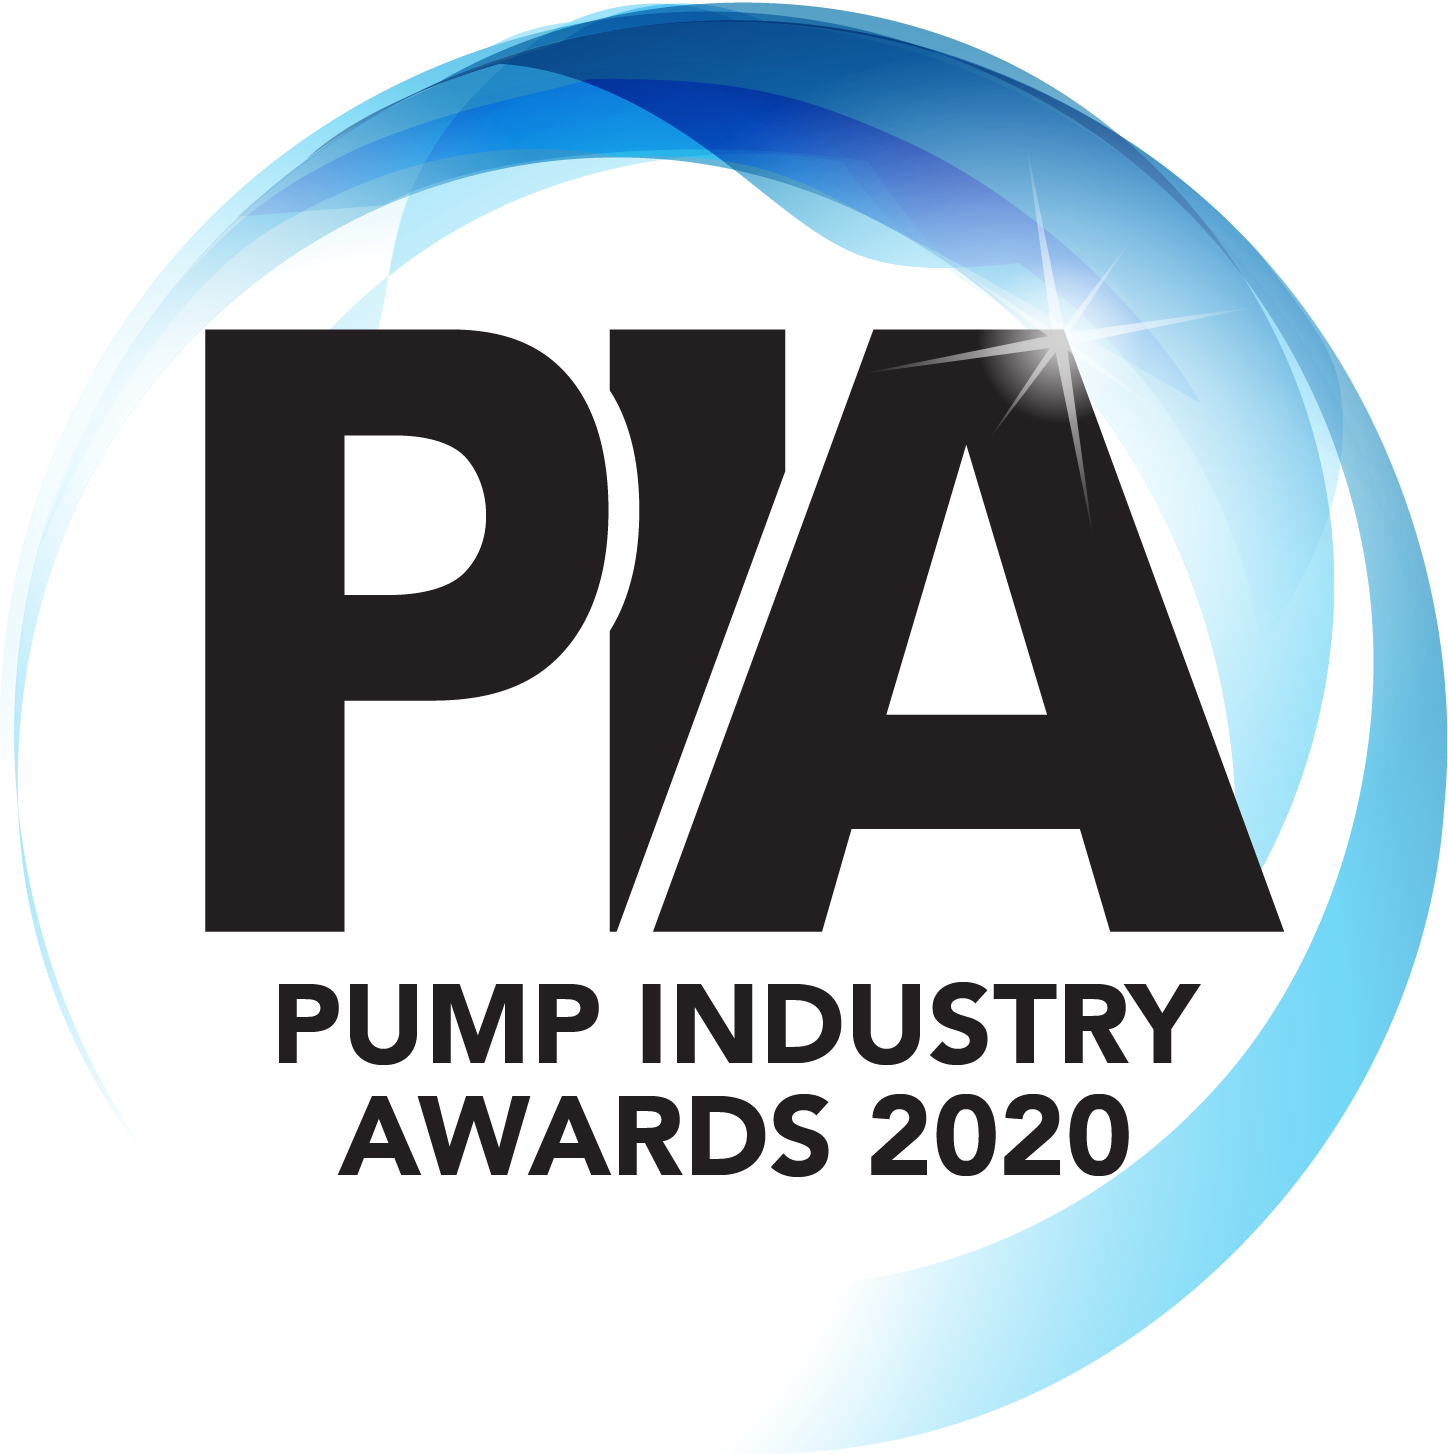 The Pump Industry Awards celebrate the achievements of both companies and individuals.